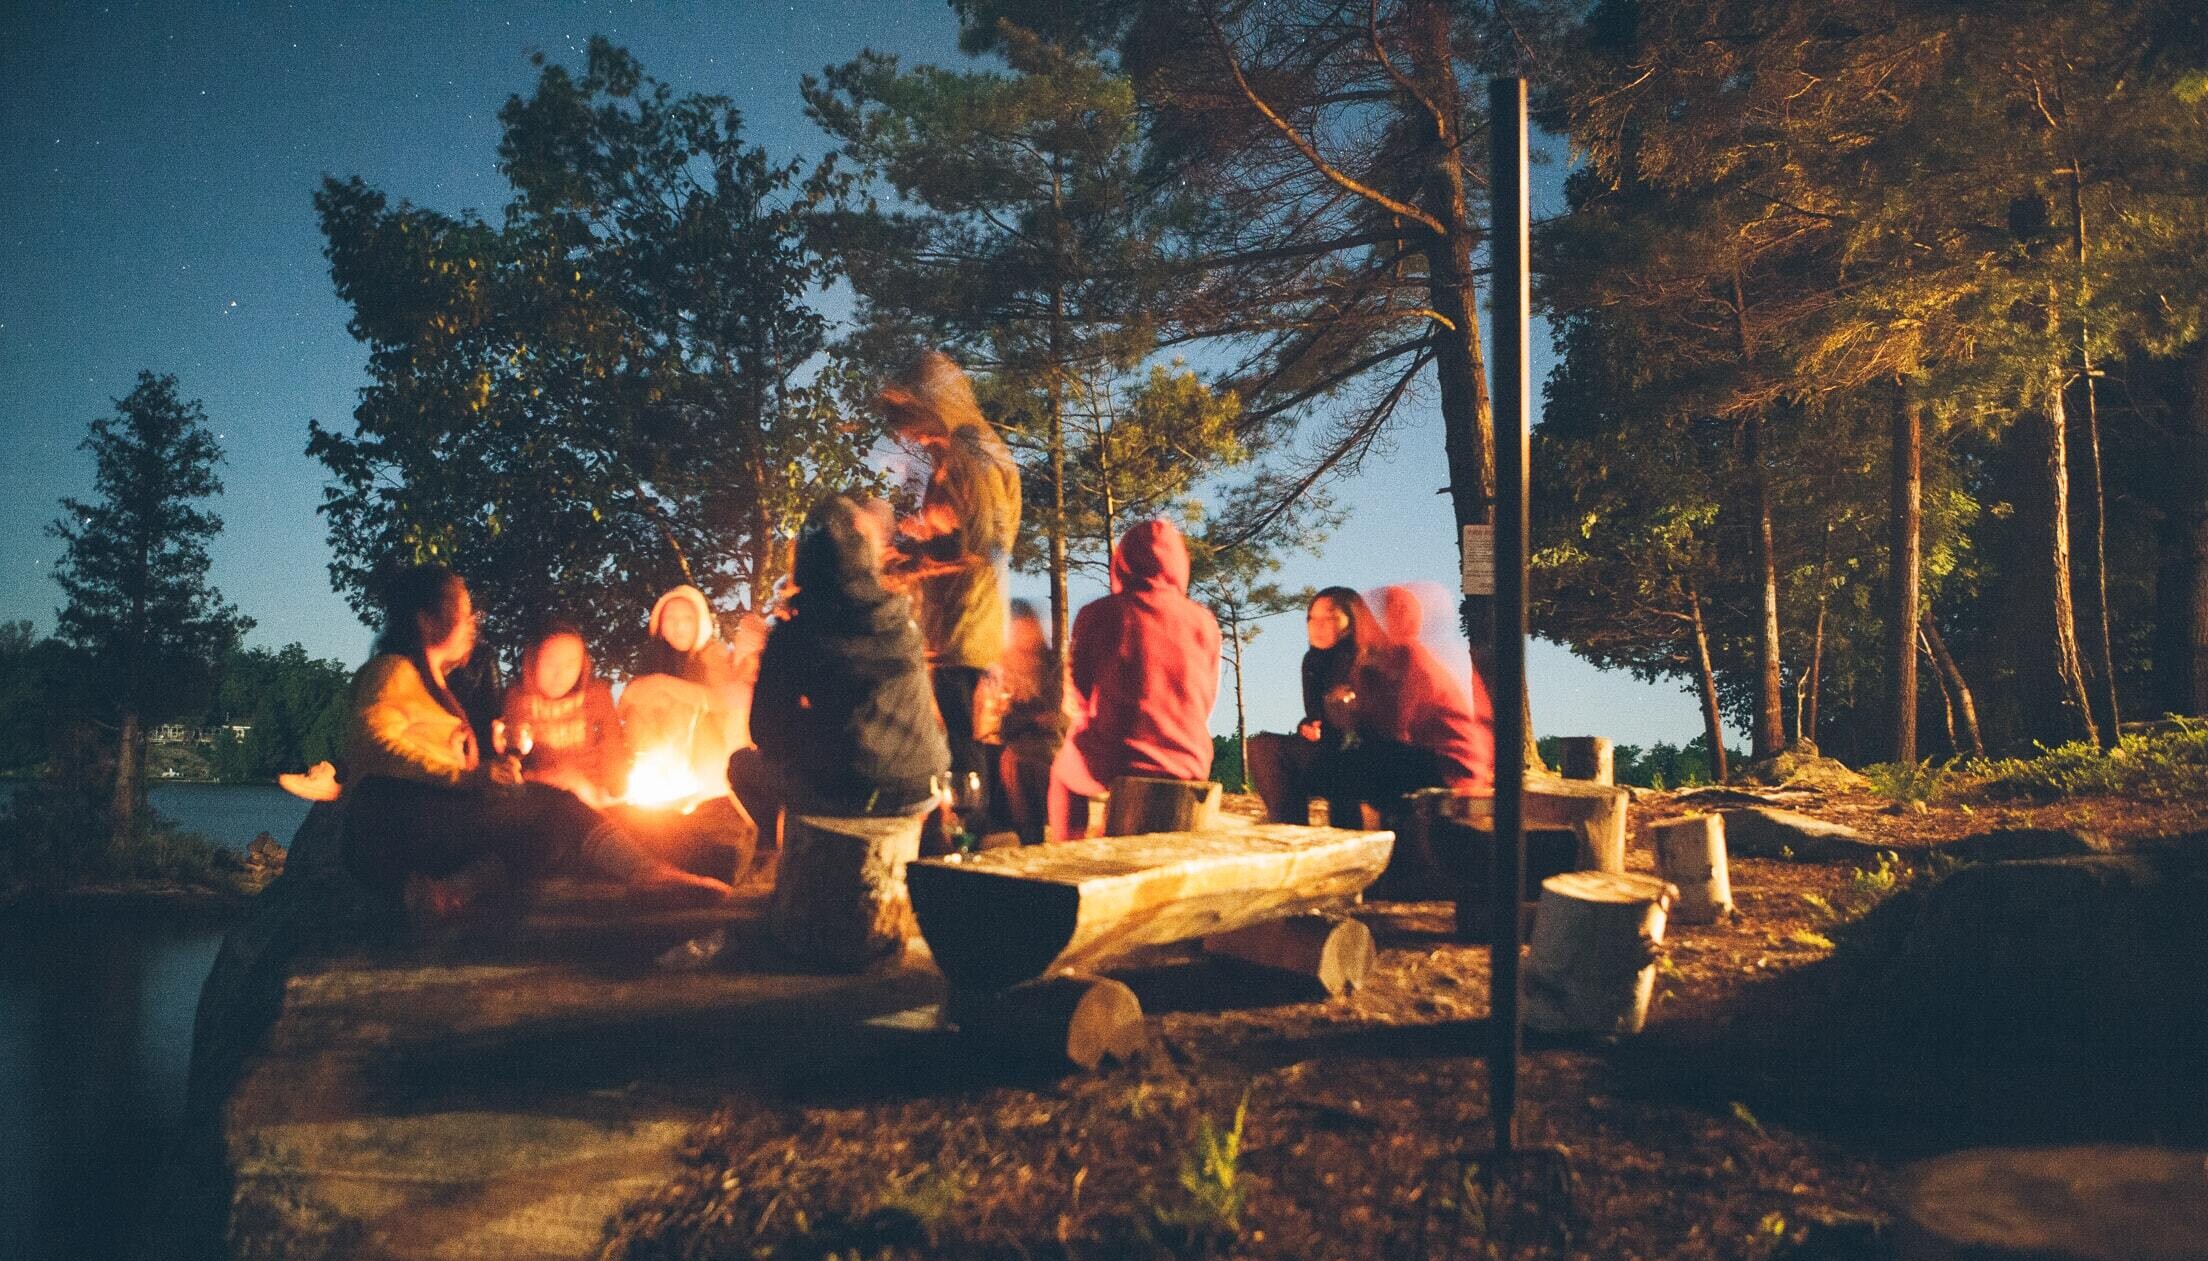 Community gathered around a campfire at dusk